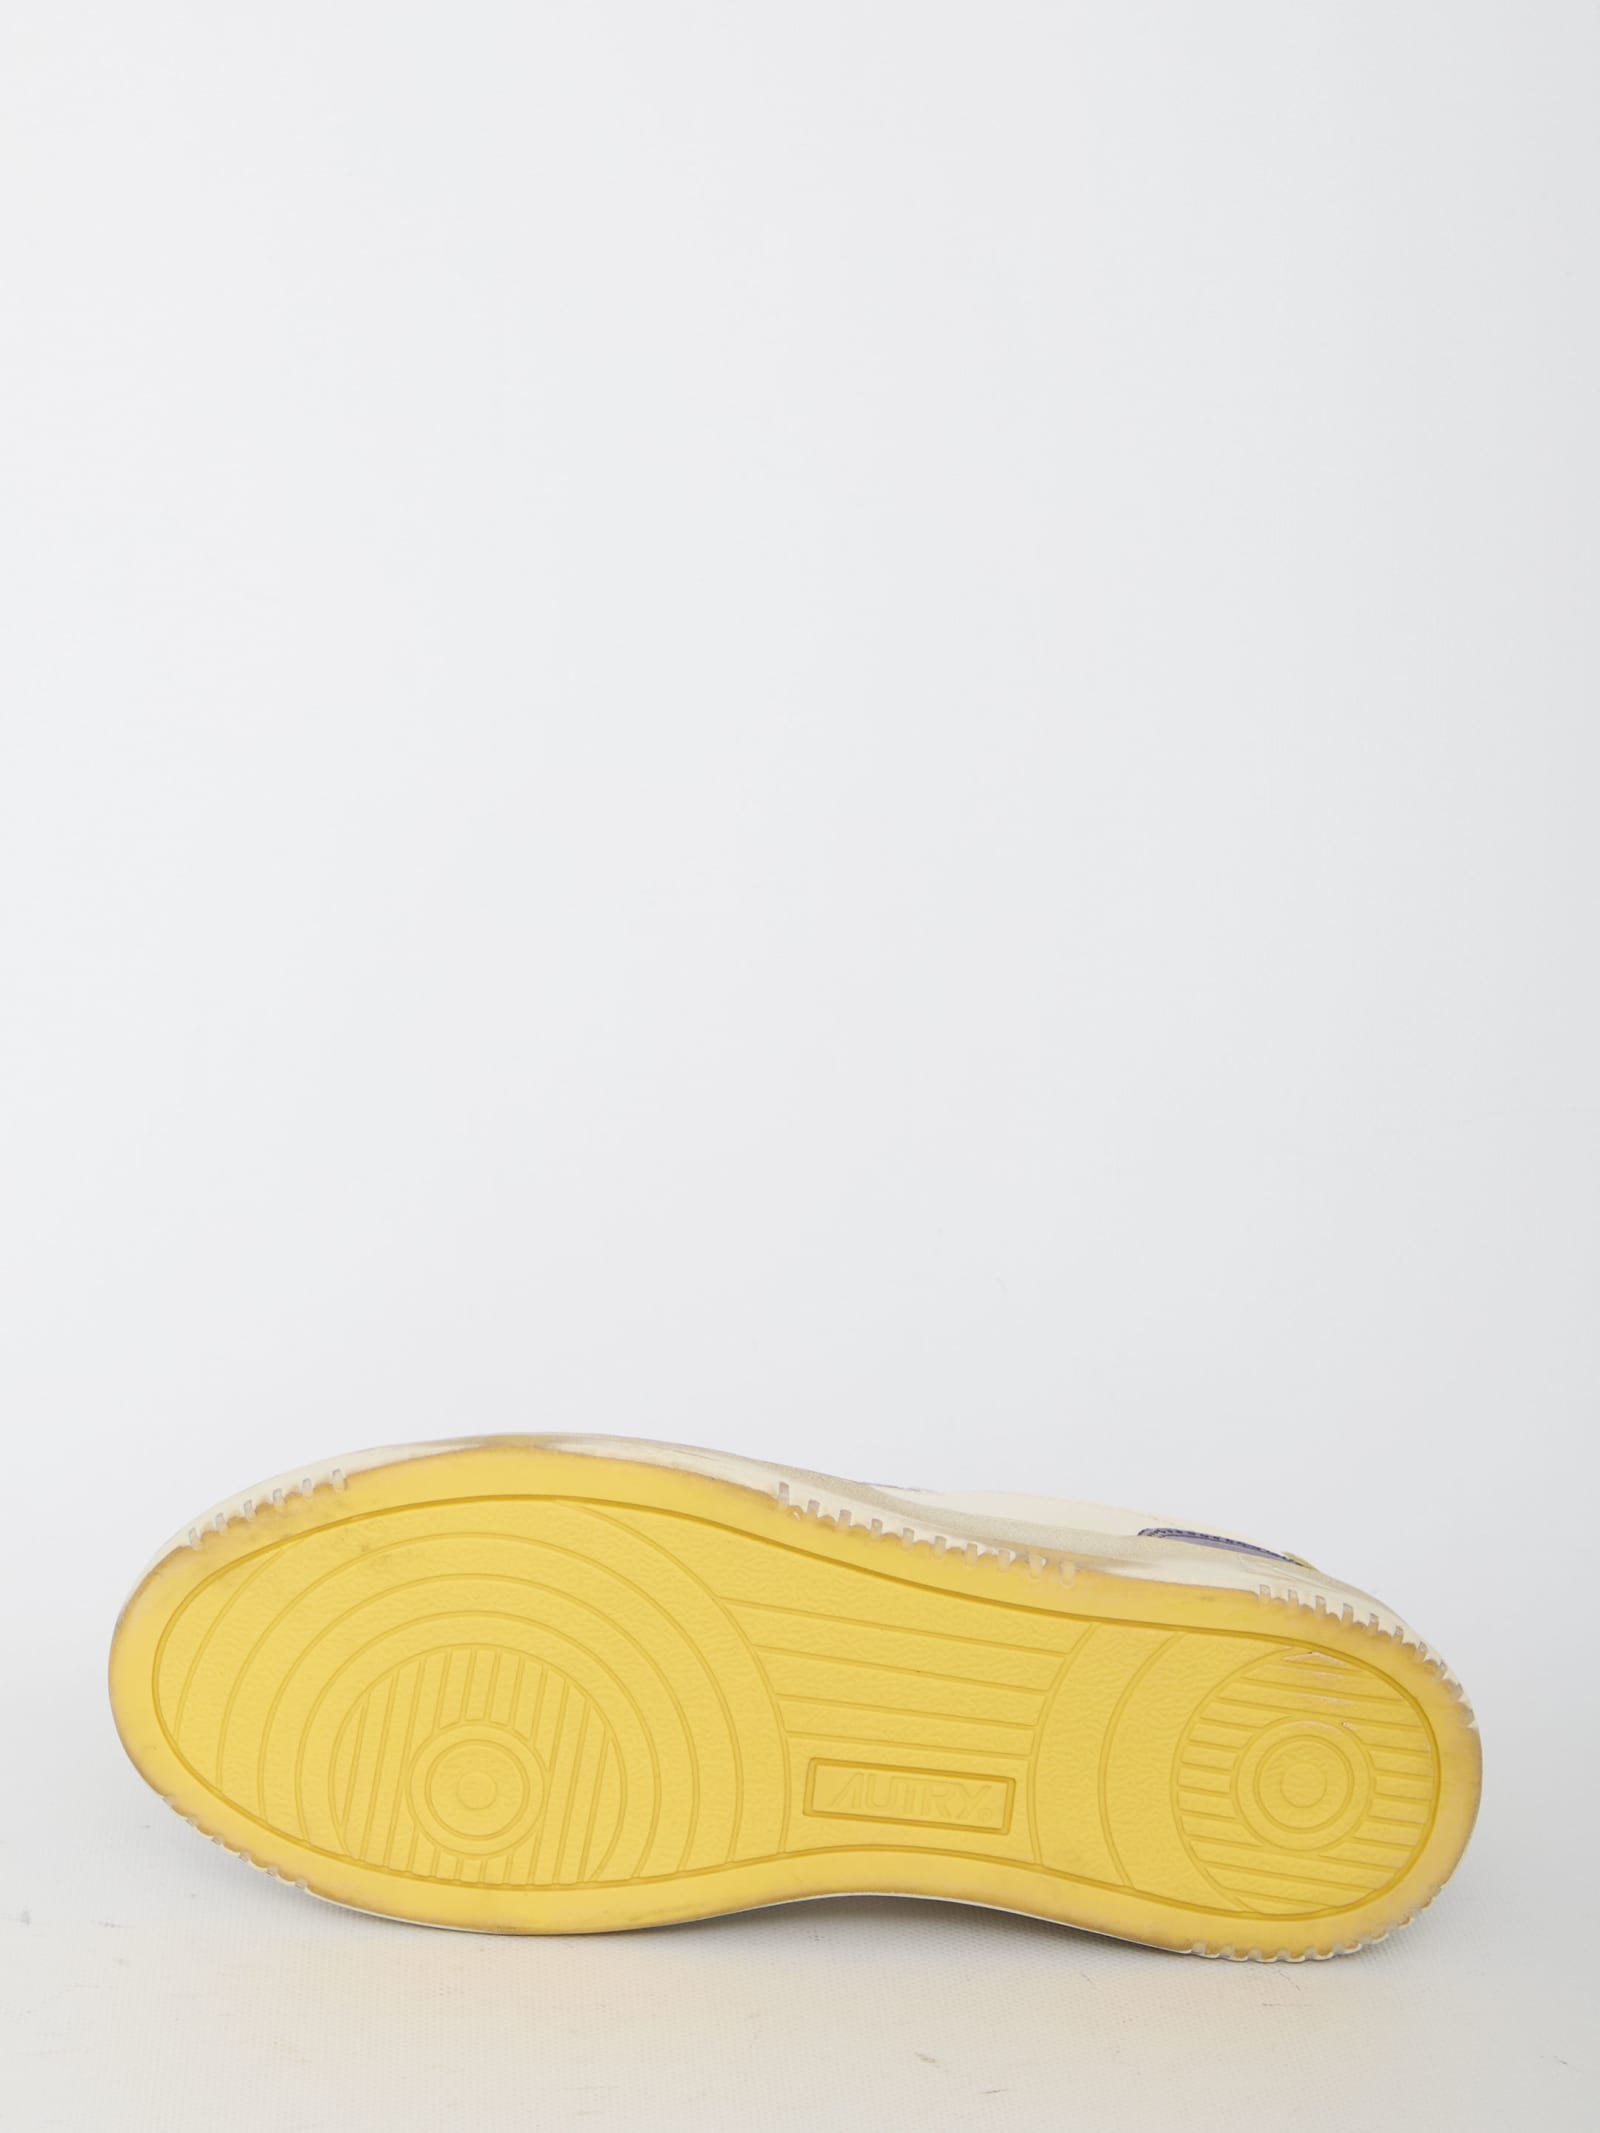 Shop Autry Medalist Low Super Vintage Sneakers In Freesia